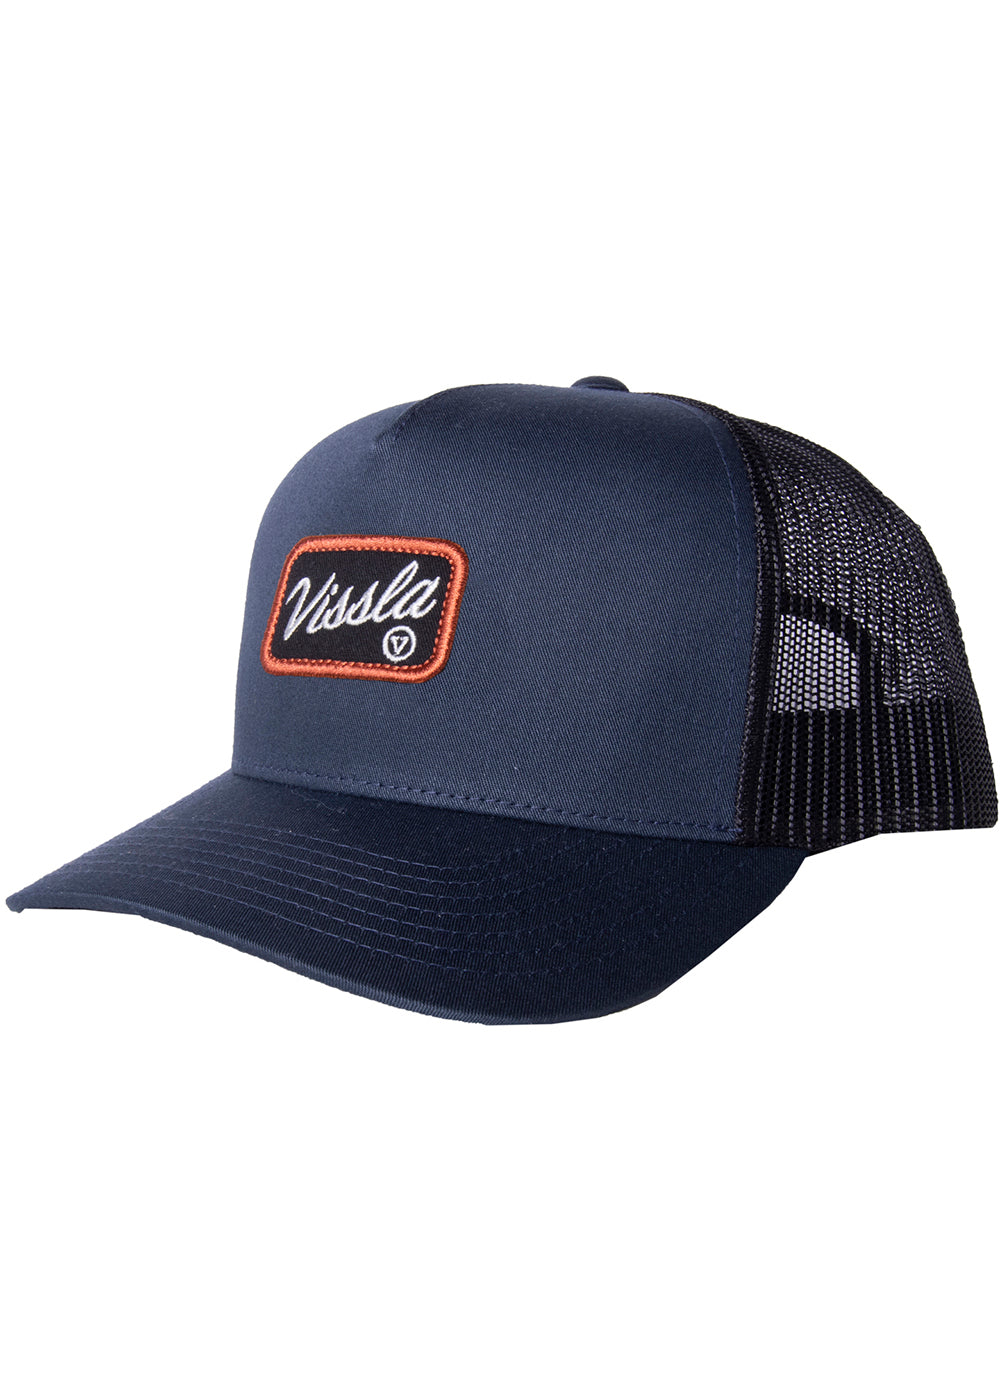 Solid Sets Eco Trucker Hat.